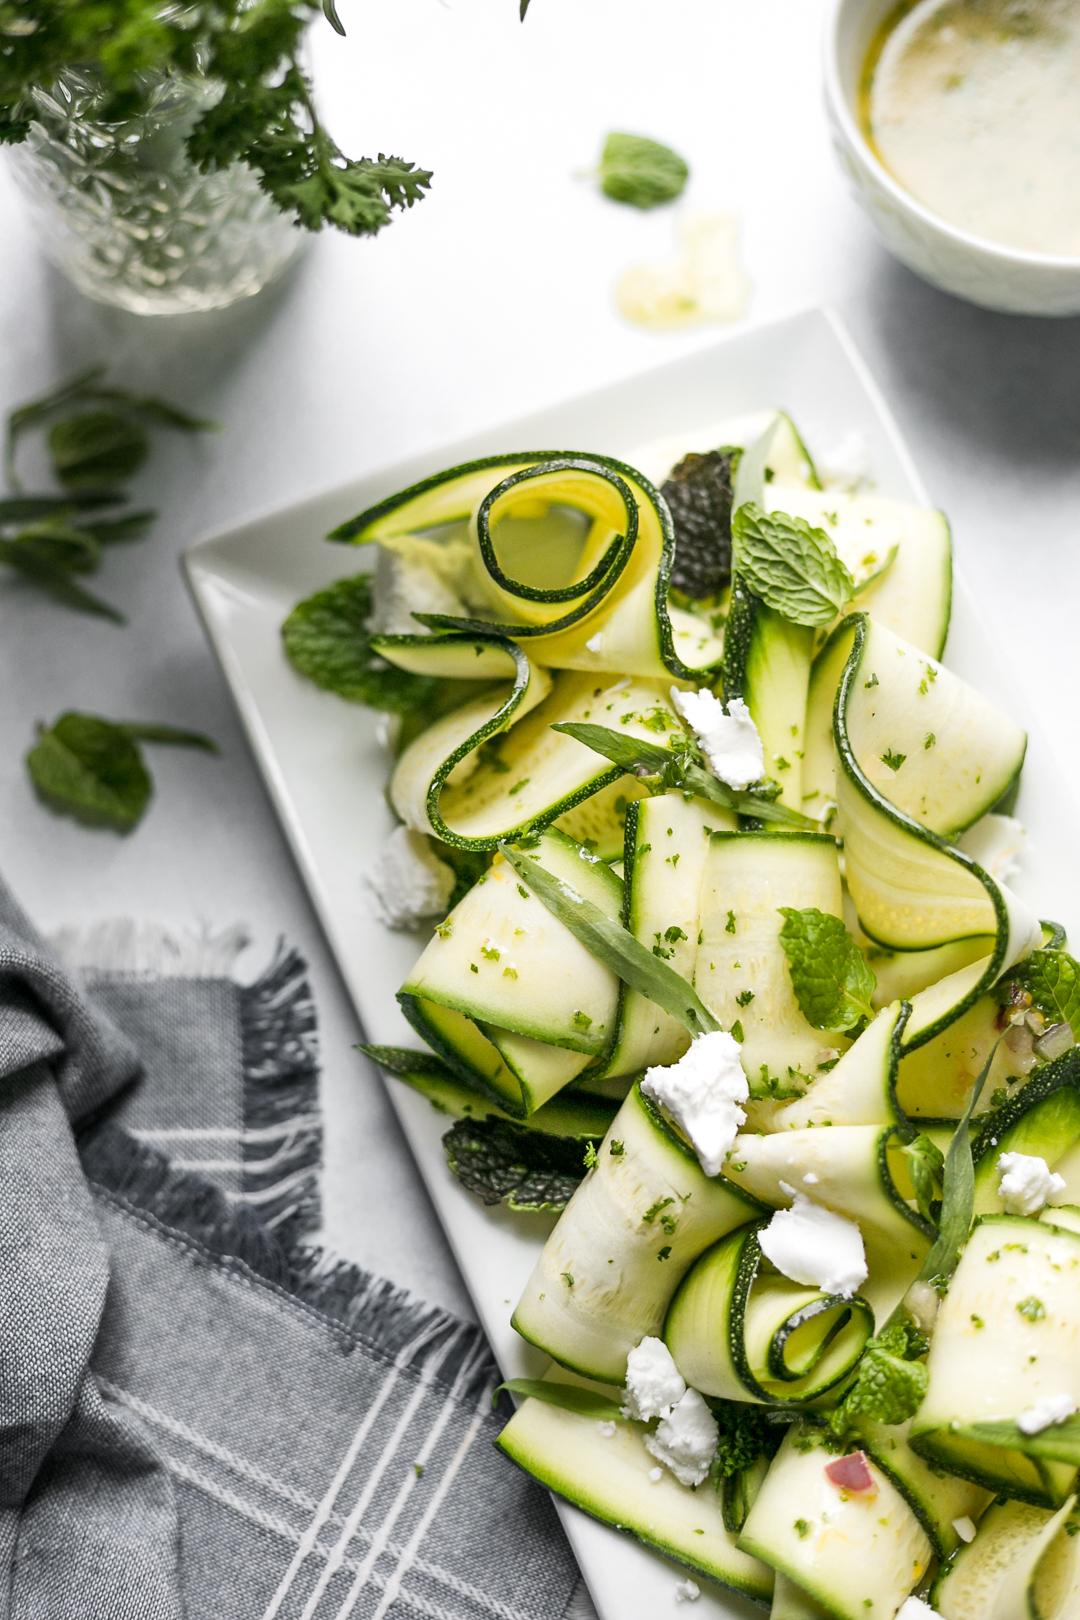 🙋🏻‍♀️ZUCCHINI RIBBON SALAD… ⭐️Have you made ribbons with